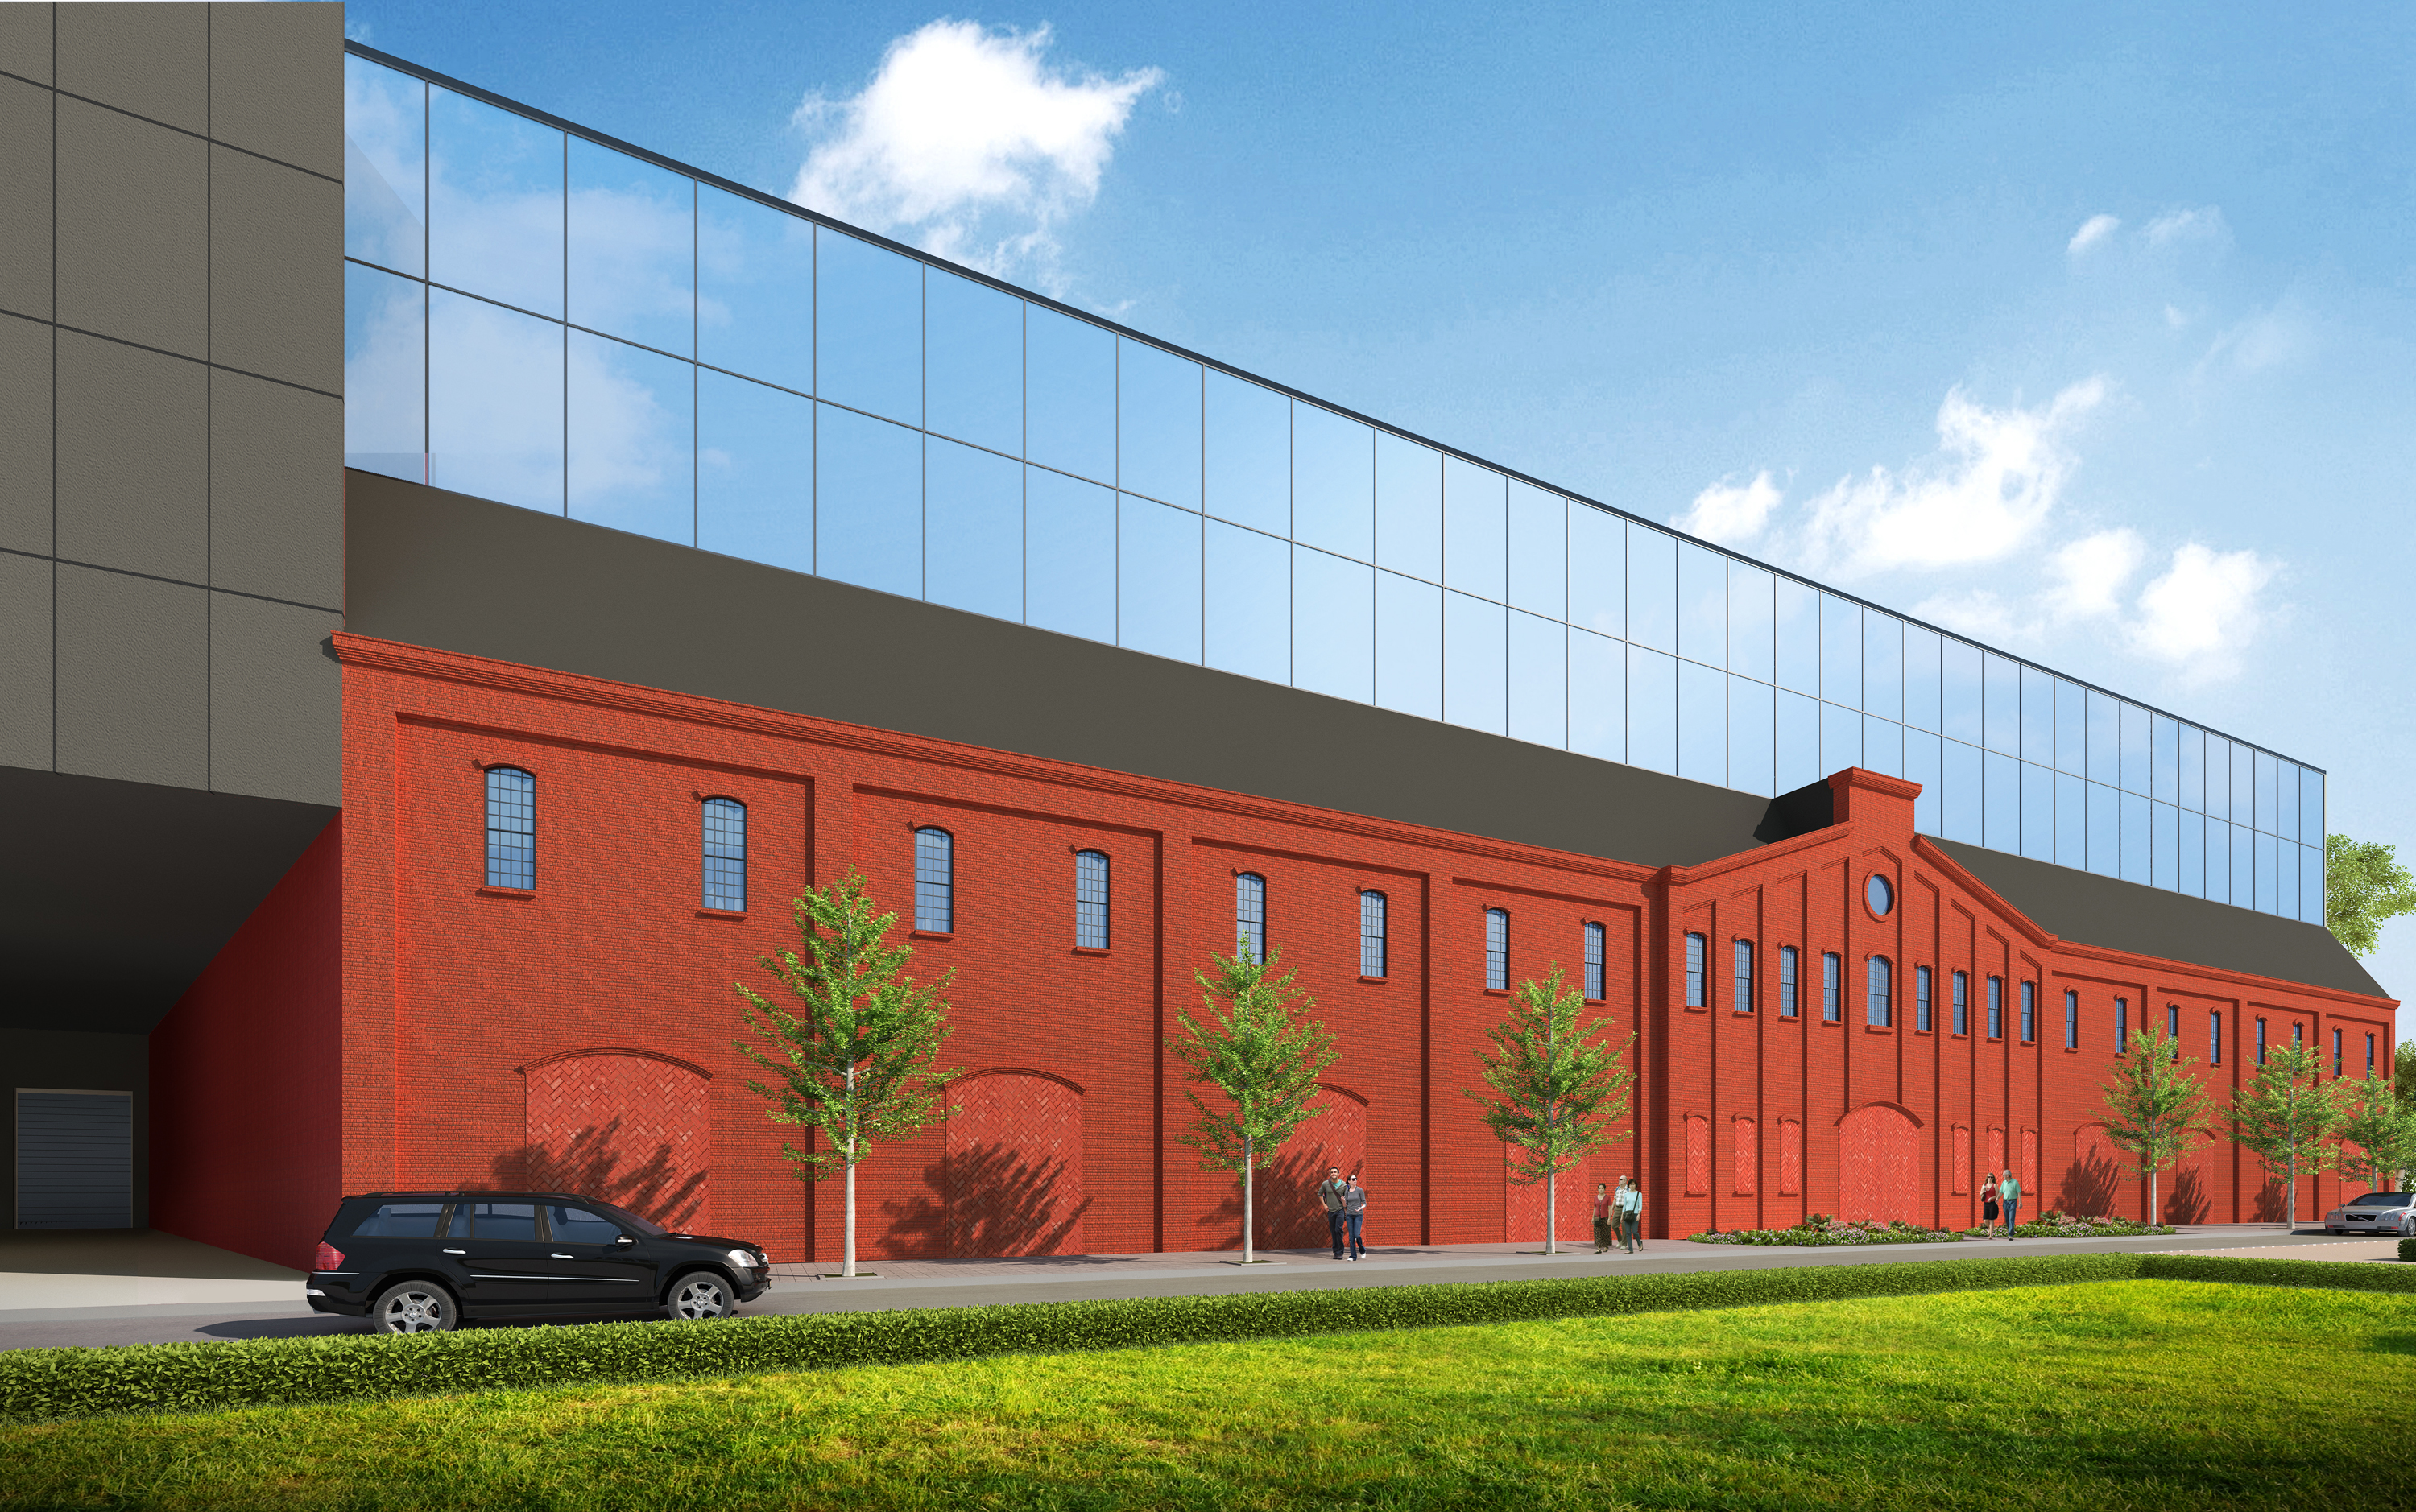 UPS plans to rebuild the south facade of the Lidgerwood Building in Red Hook. Rendering courtesy of UPS